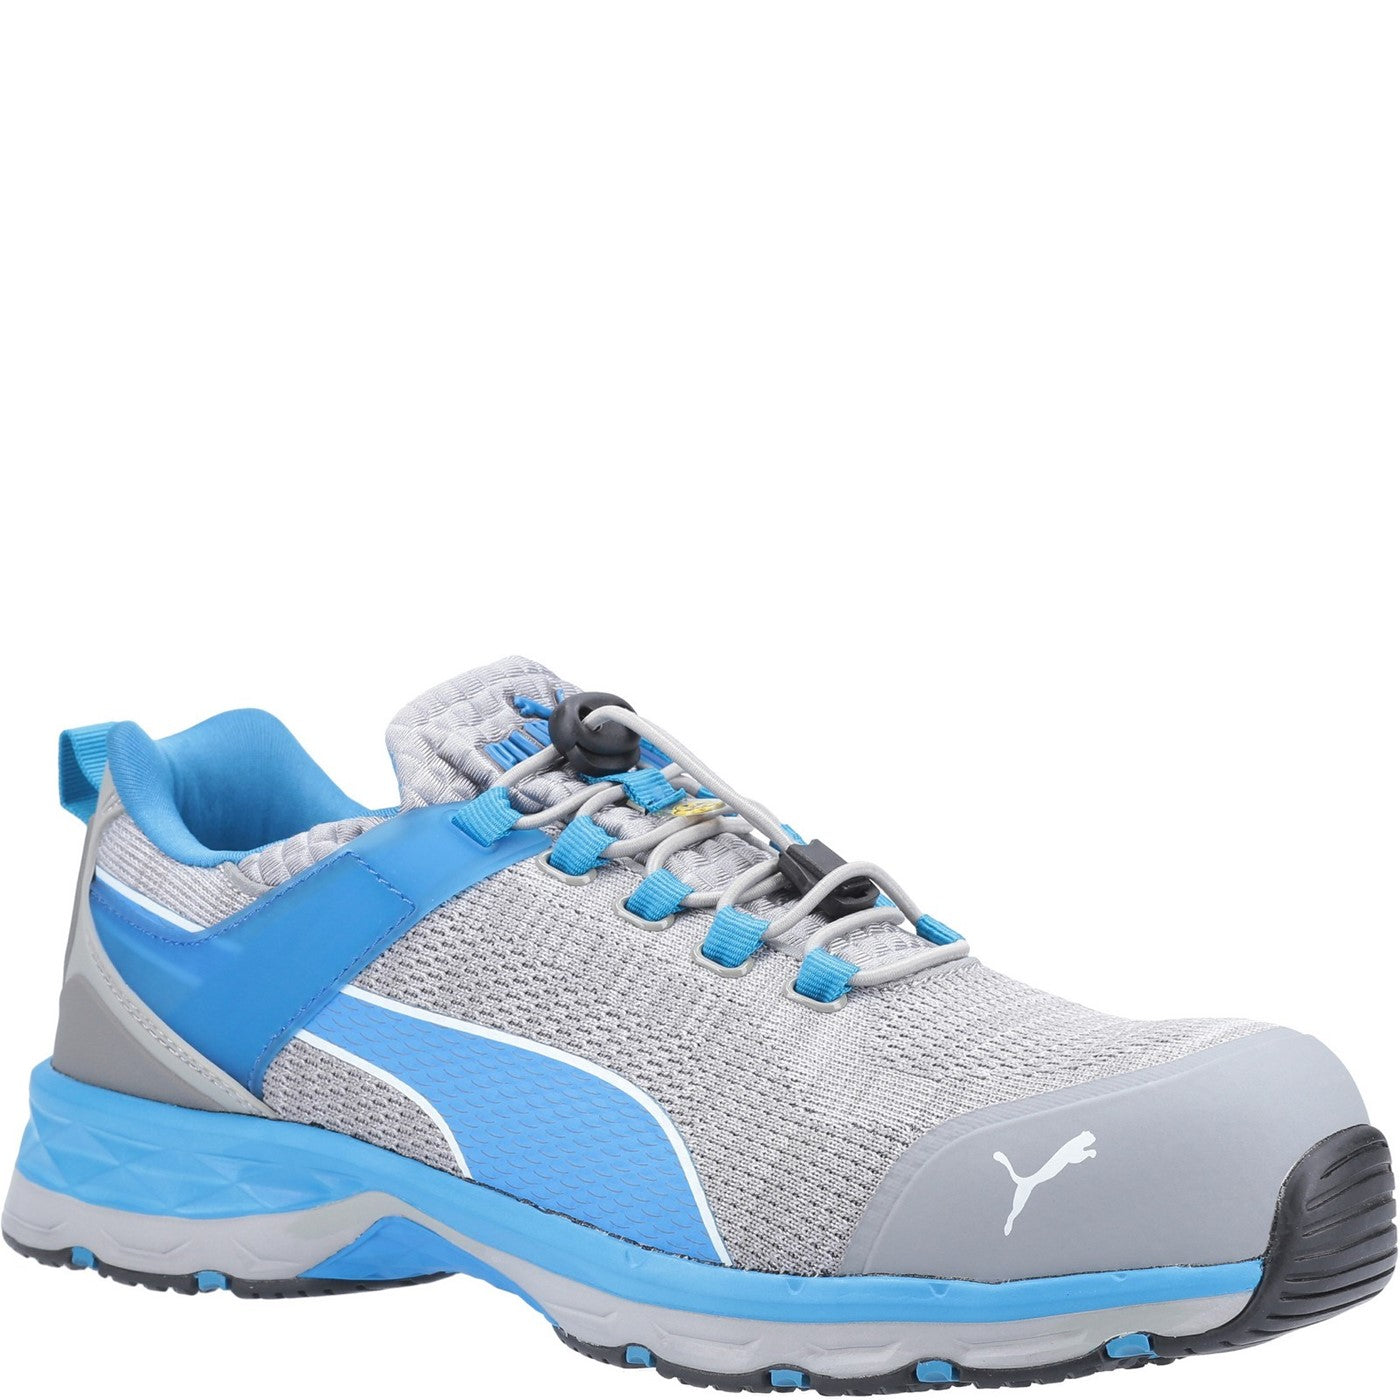 Unisex Puma Safety Xcite Low Toggle Safety Trainer